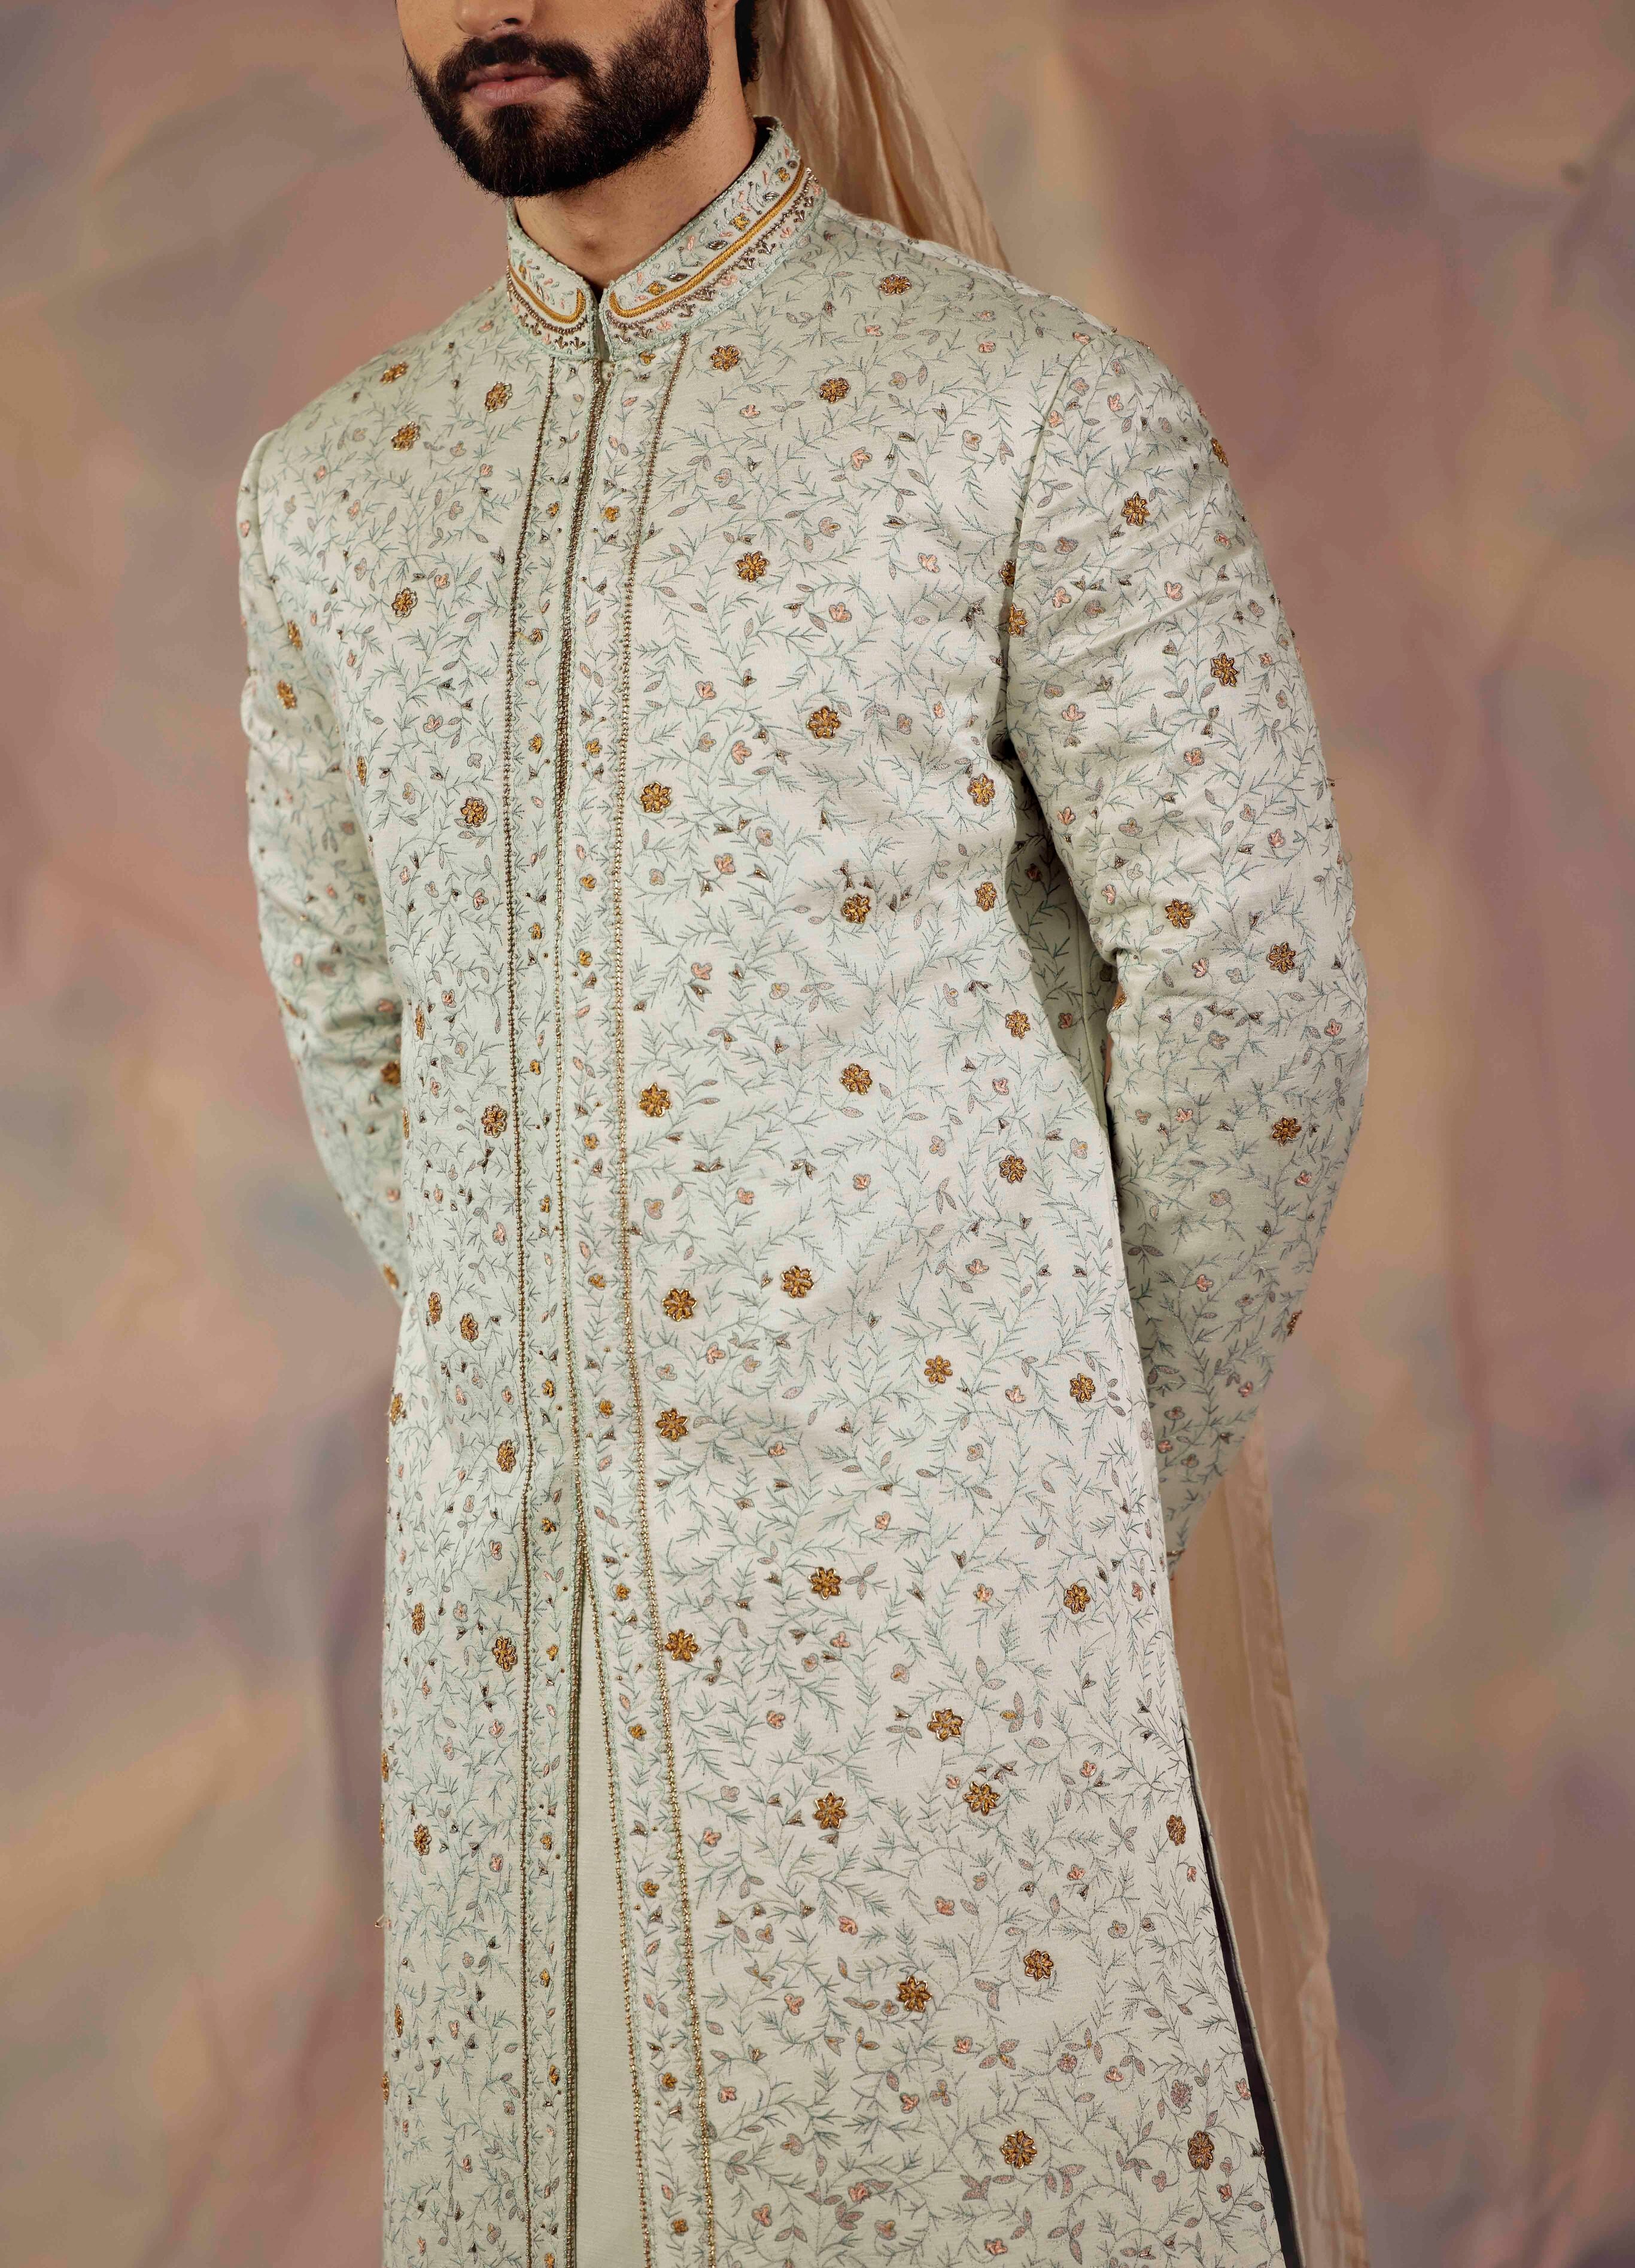 Step into regal elegance with the Silver Lining Sherwani Set